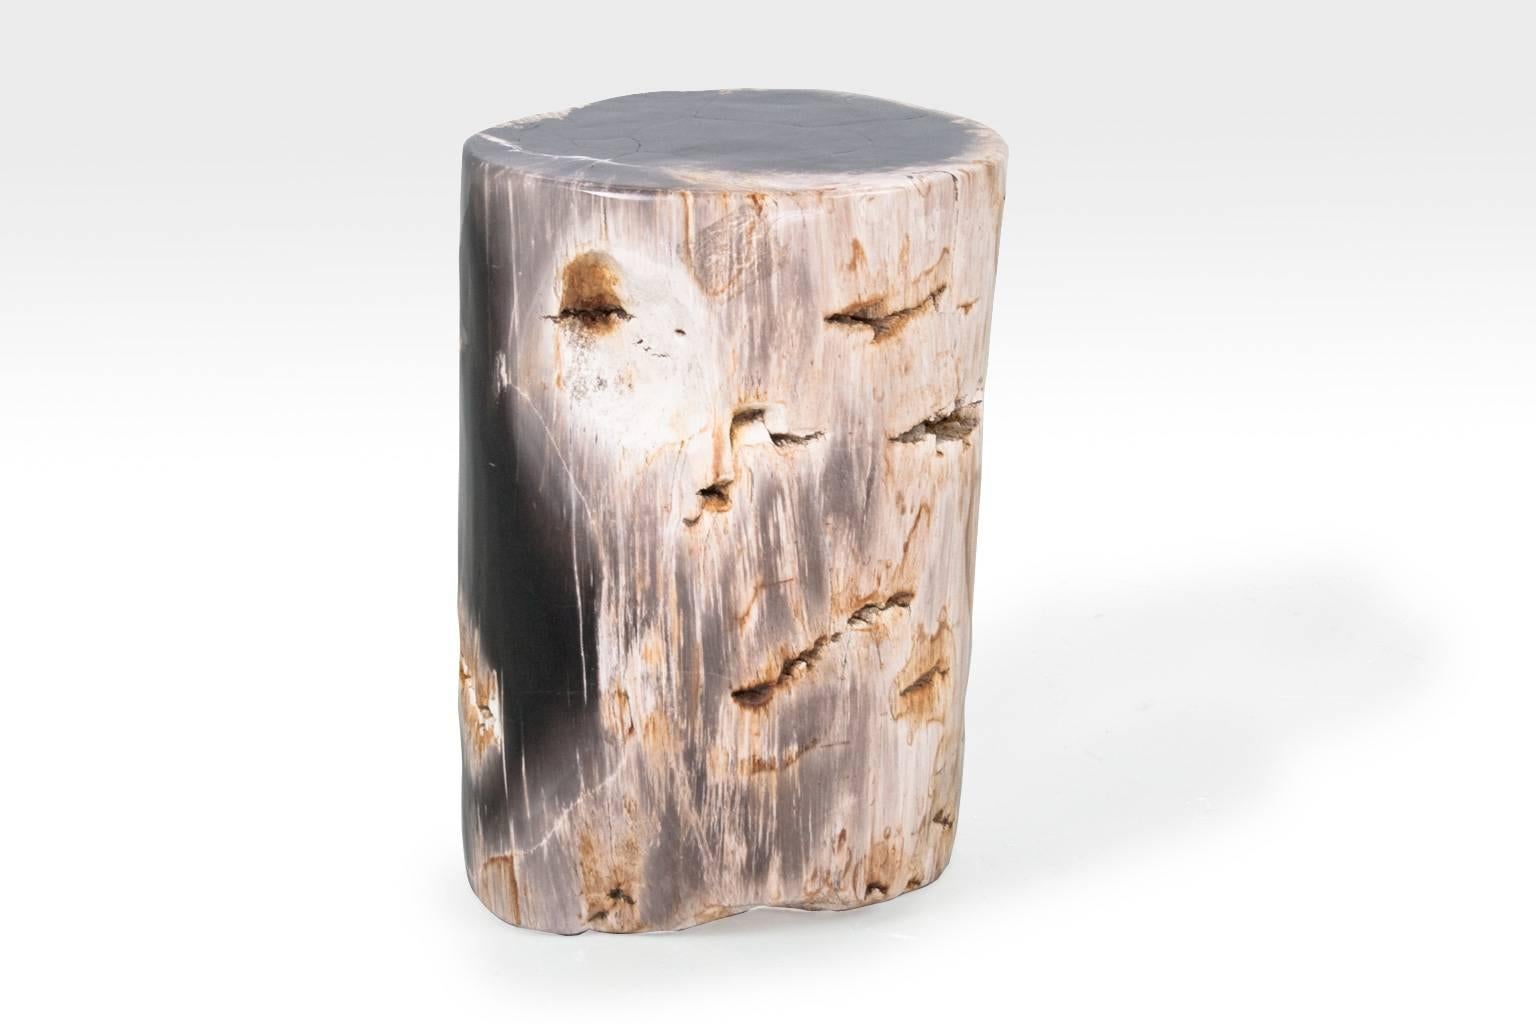 Hand picked petrified wood side table or pedestal. Smooth sanded an polished. The object still holds the organic and typically wooden tissue and carvings.  Due to item weight (31 kg), the piece will be shipped in a small crate.

Petrified wood is